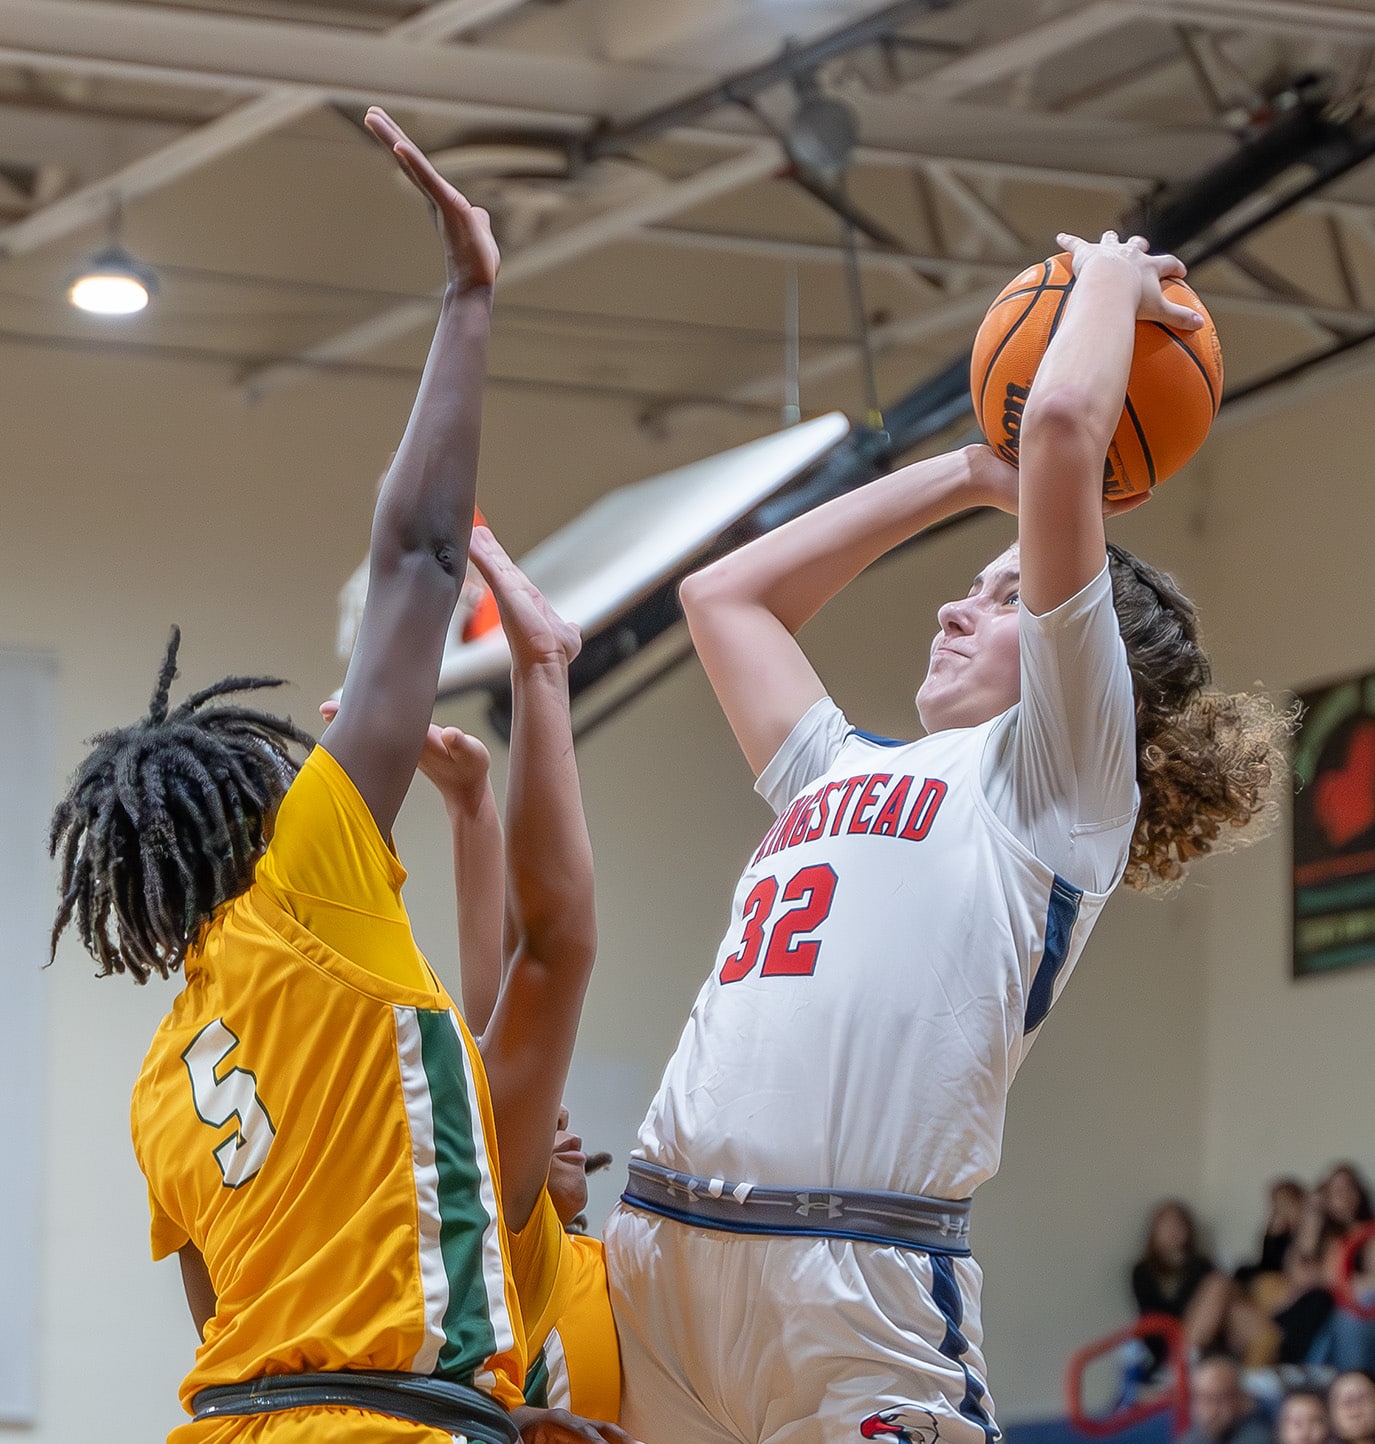 Springstead High School, 32, Addy Osborne shoots over Forest High, 5, Janaina Wess in the 6A Division 4 Championship Game versus visiting Forest High. [Photo by Joe DiCristofalo]